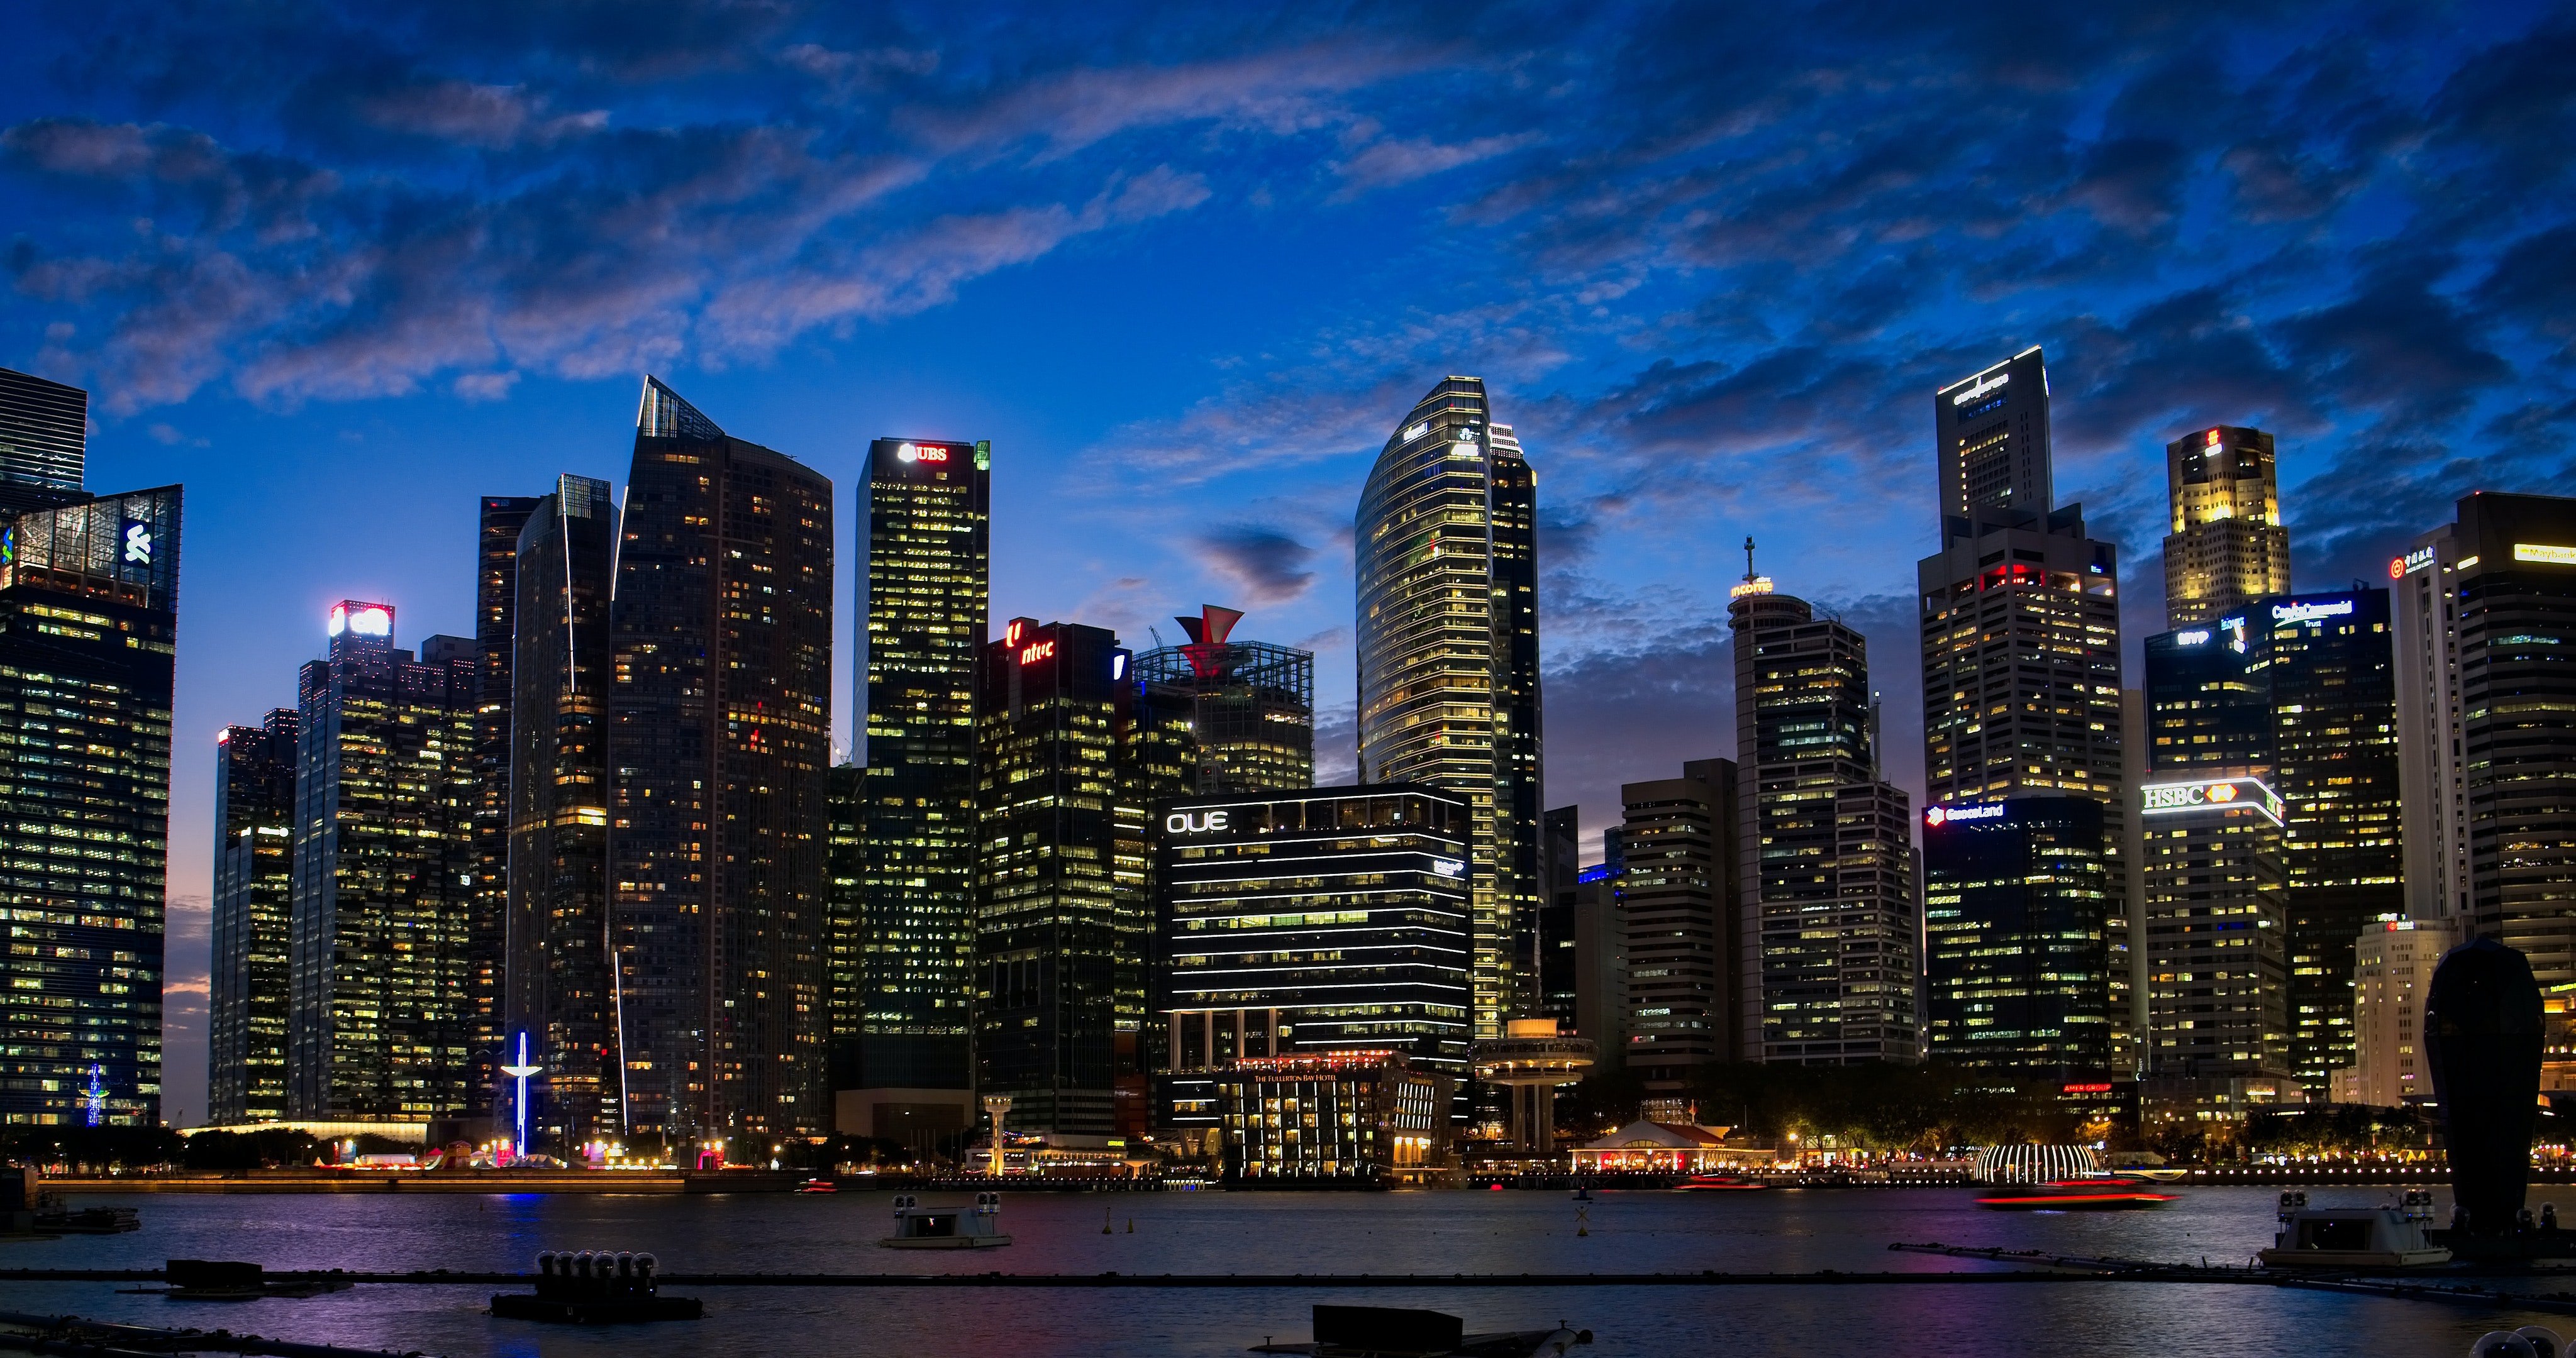 HOW CAN INDIANS START A BUSINESS IN SINGAPORE? WHAT ARE THE LEGAL REQUIREMENTS FOR THE SAME?